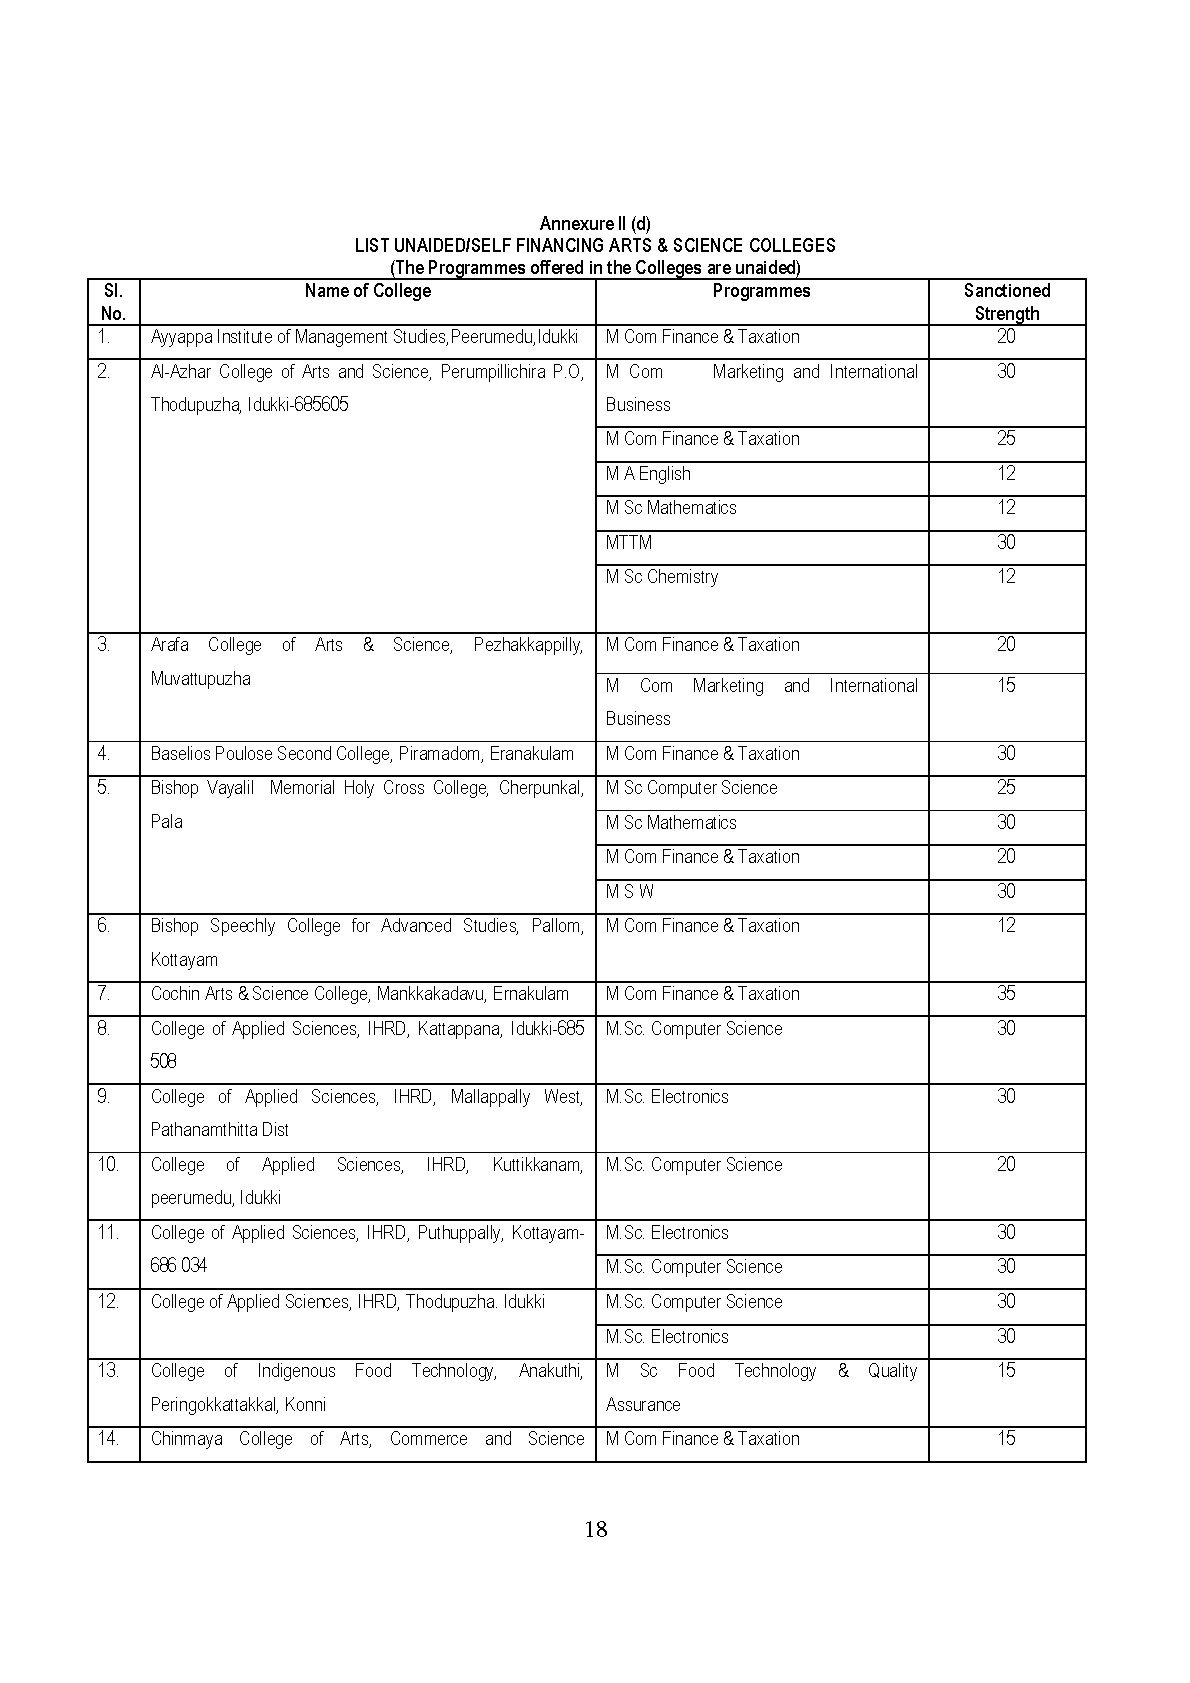 List of Unaided Arts and Science Colleges of MG University 2019 - Notification Image 1